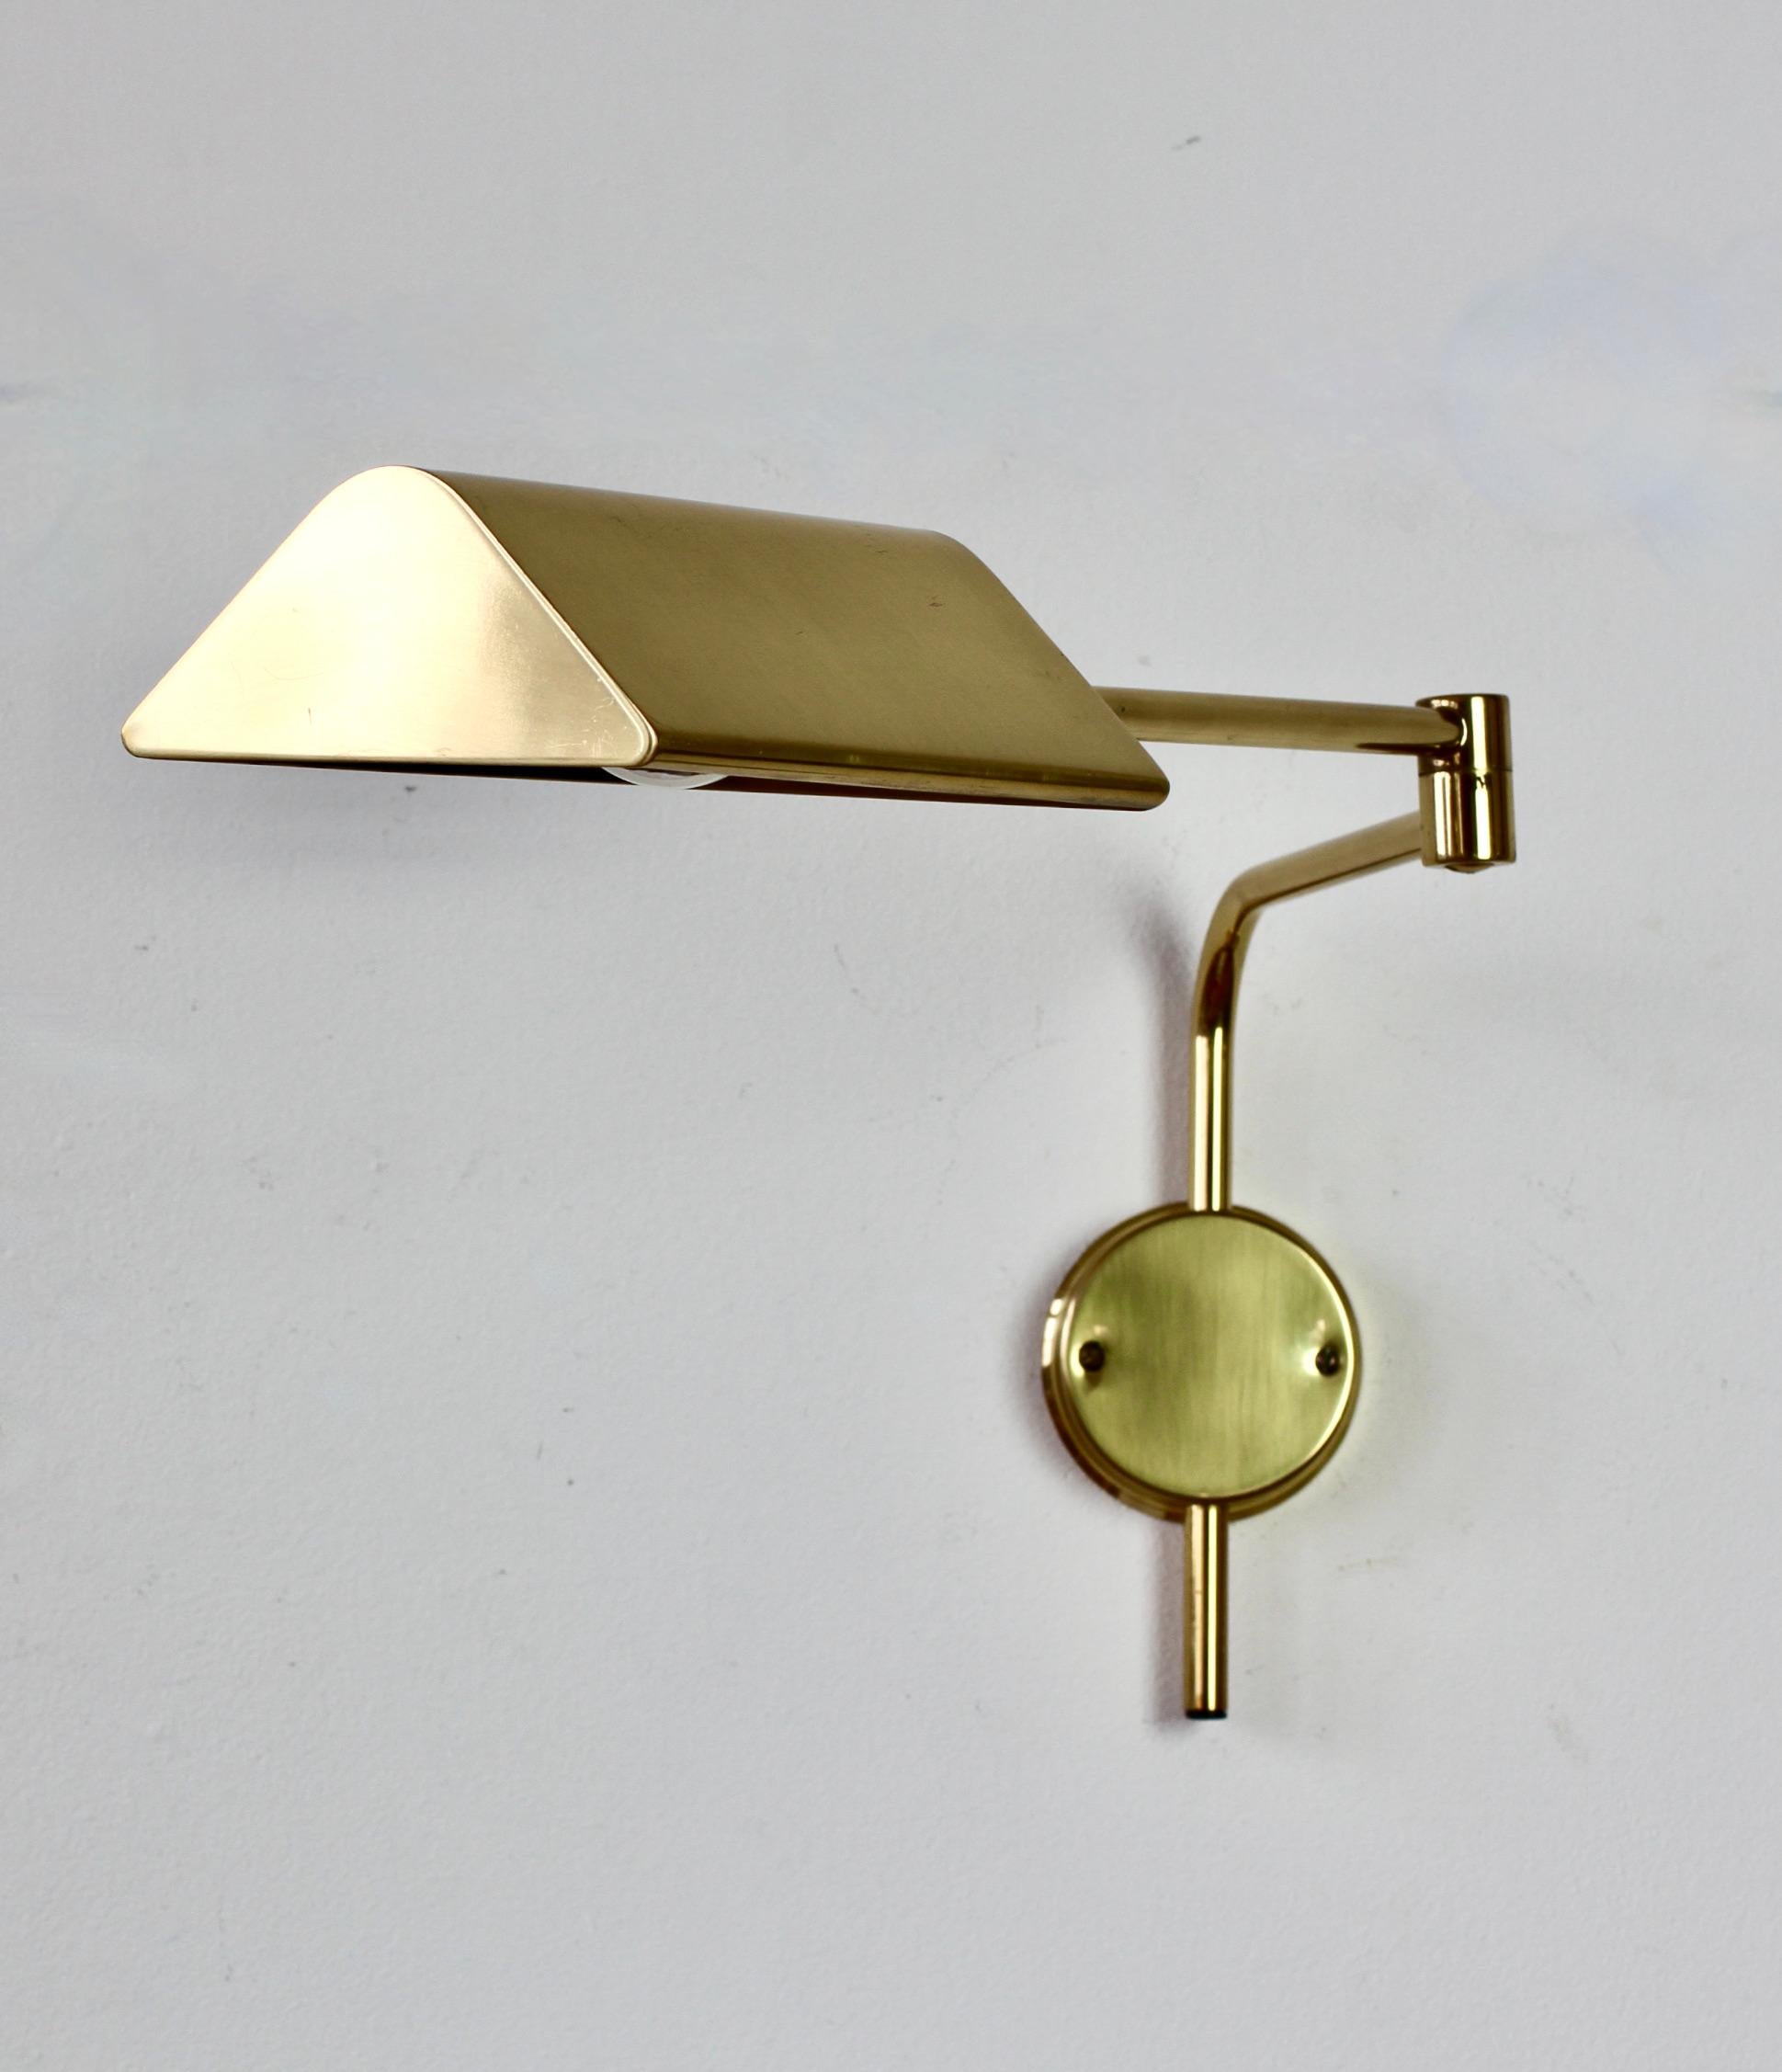 wall mounted reading light